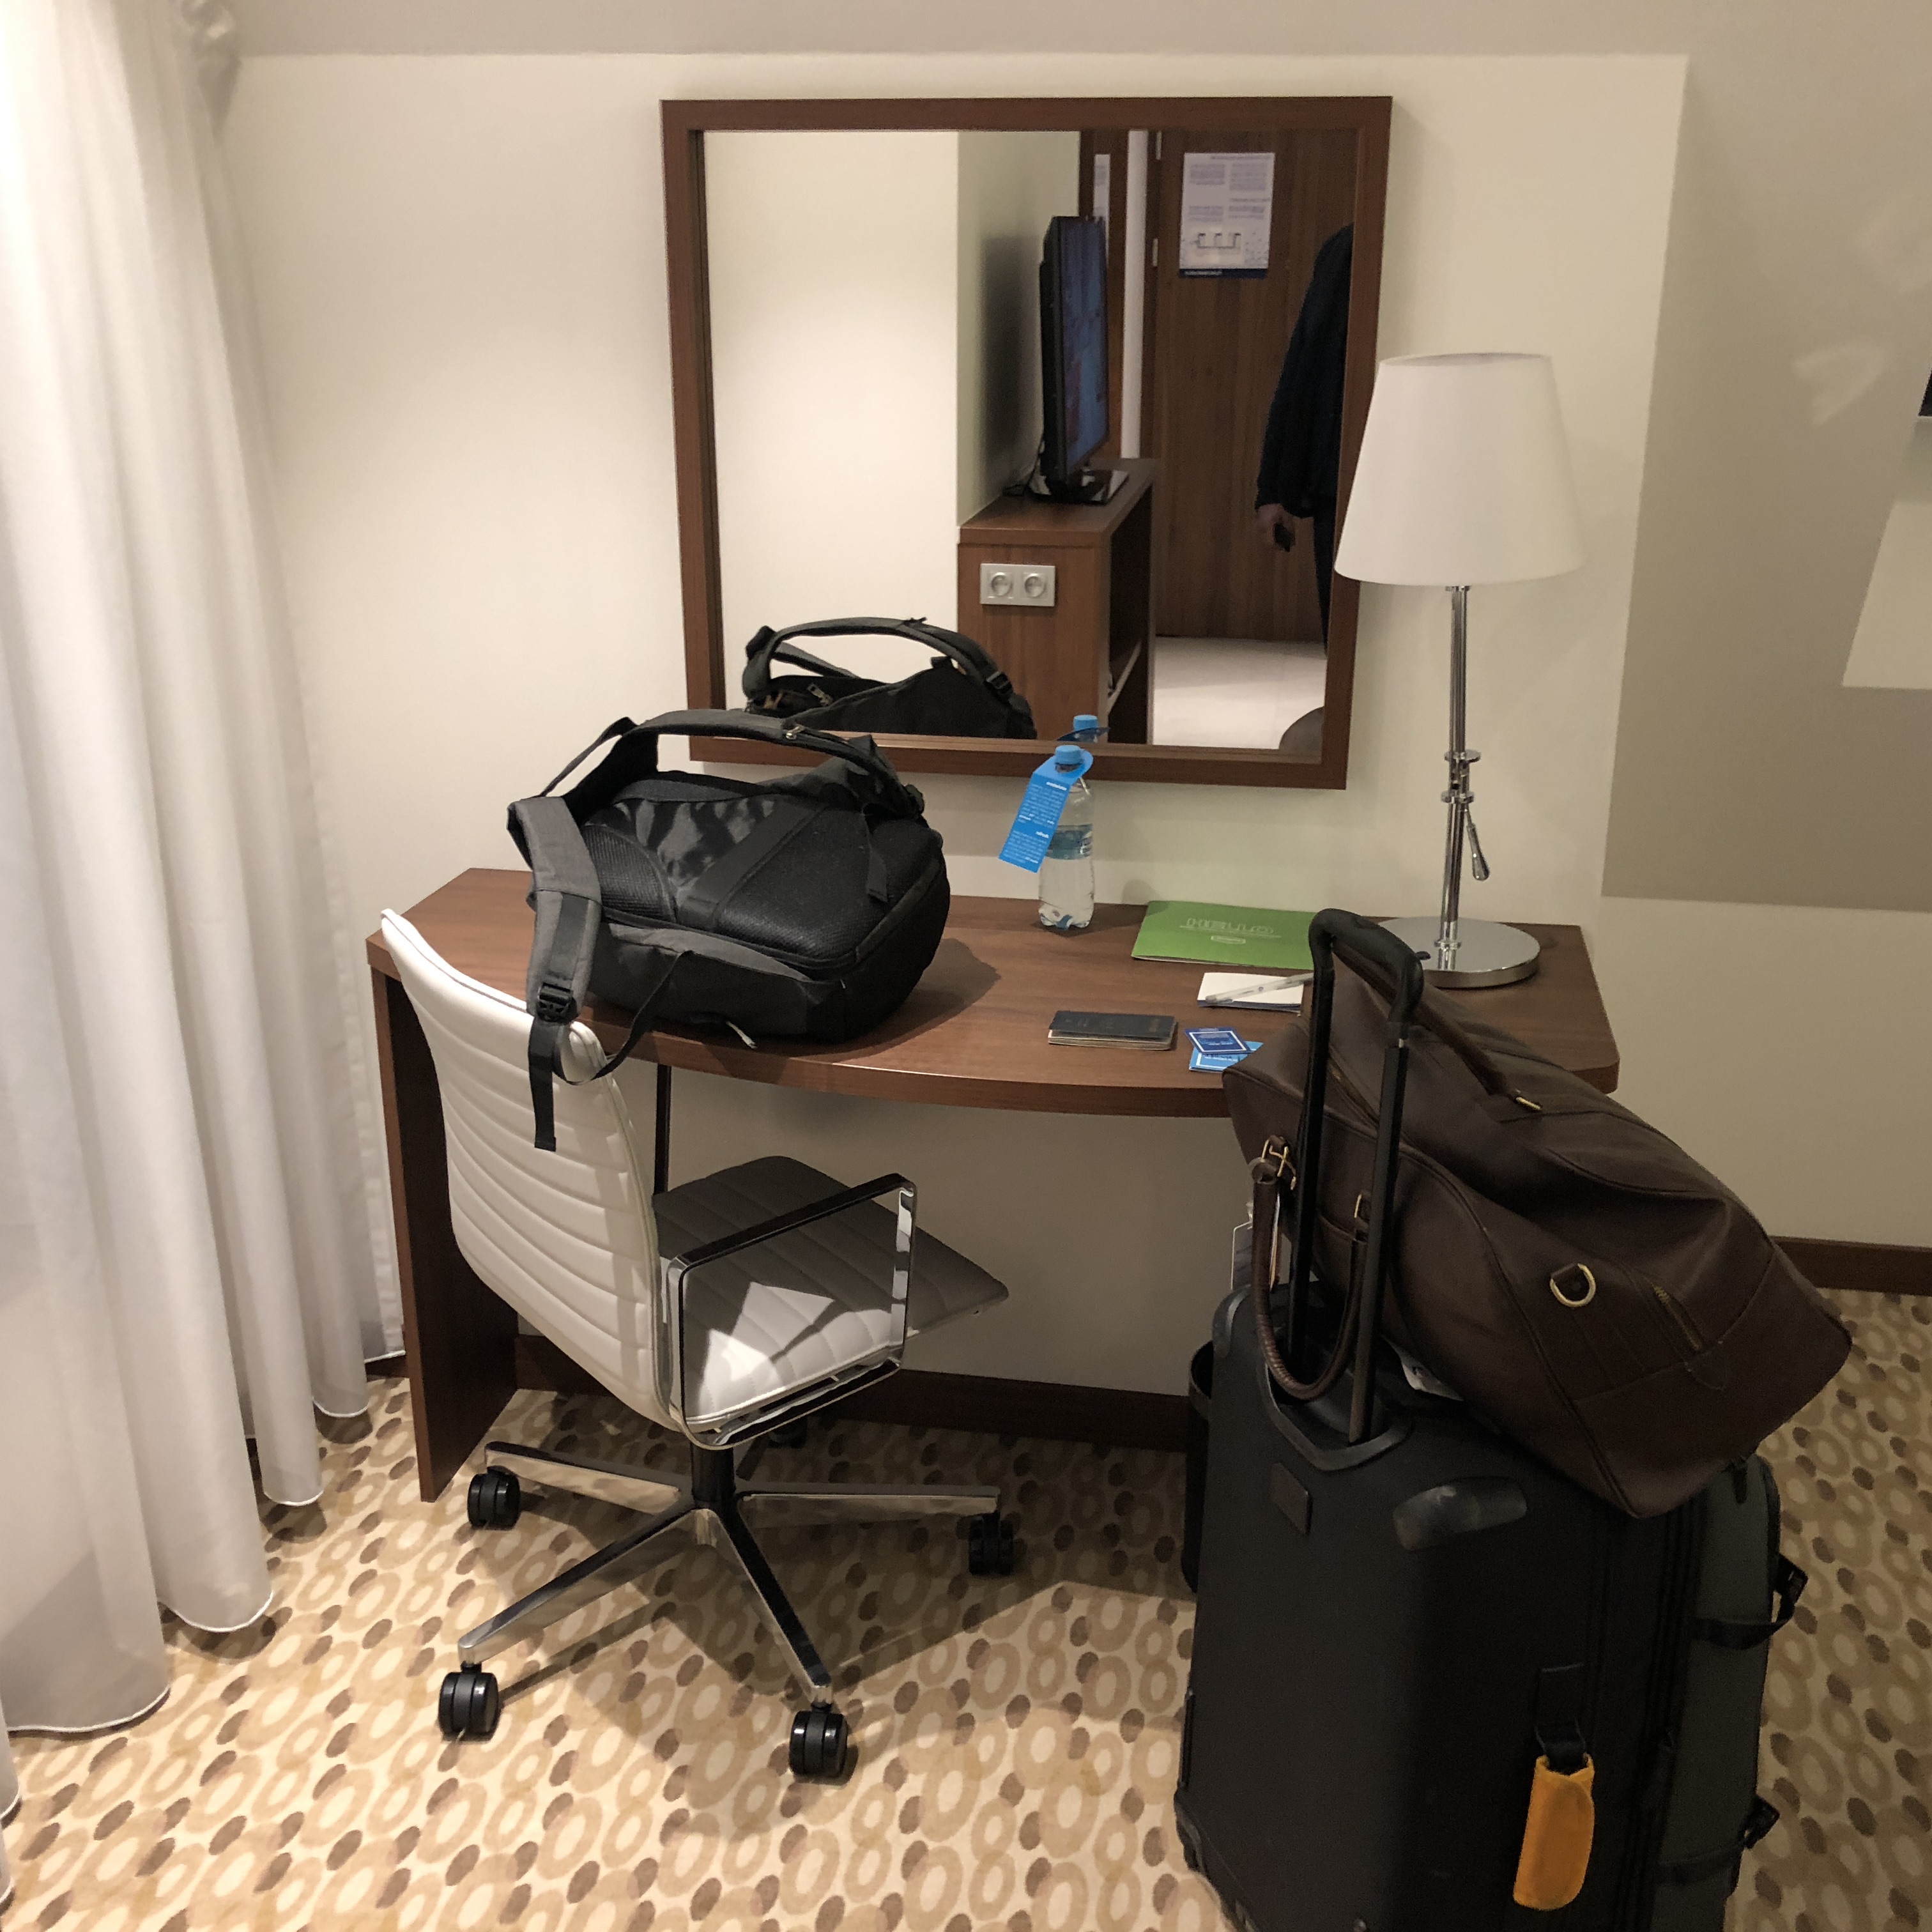 a room with a mirror and luggage